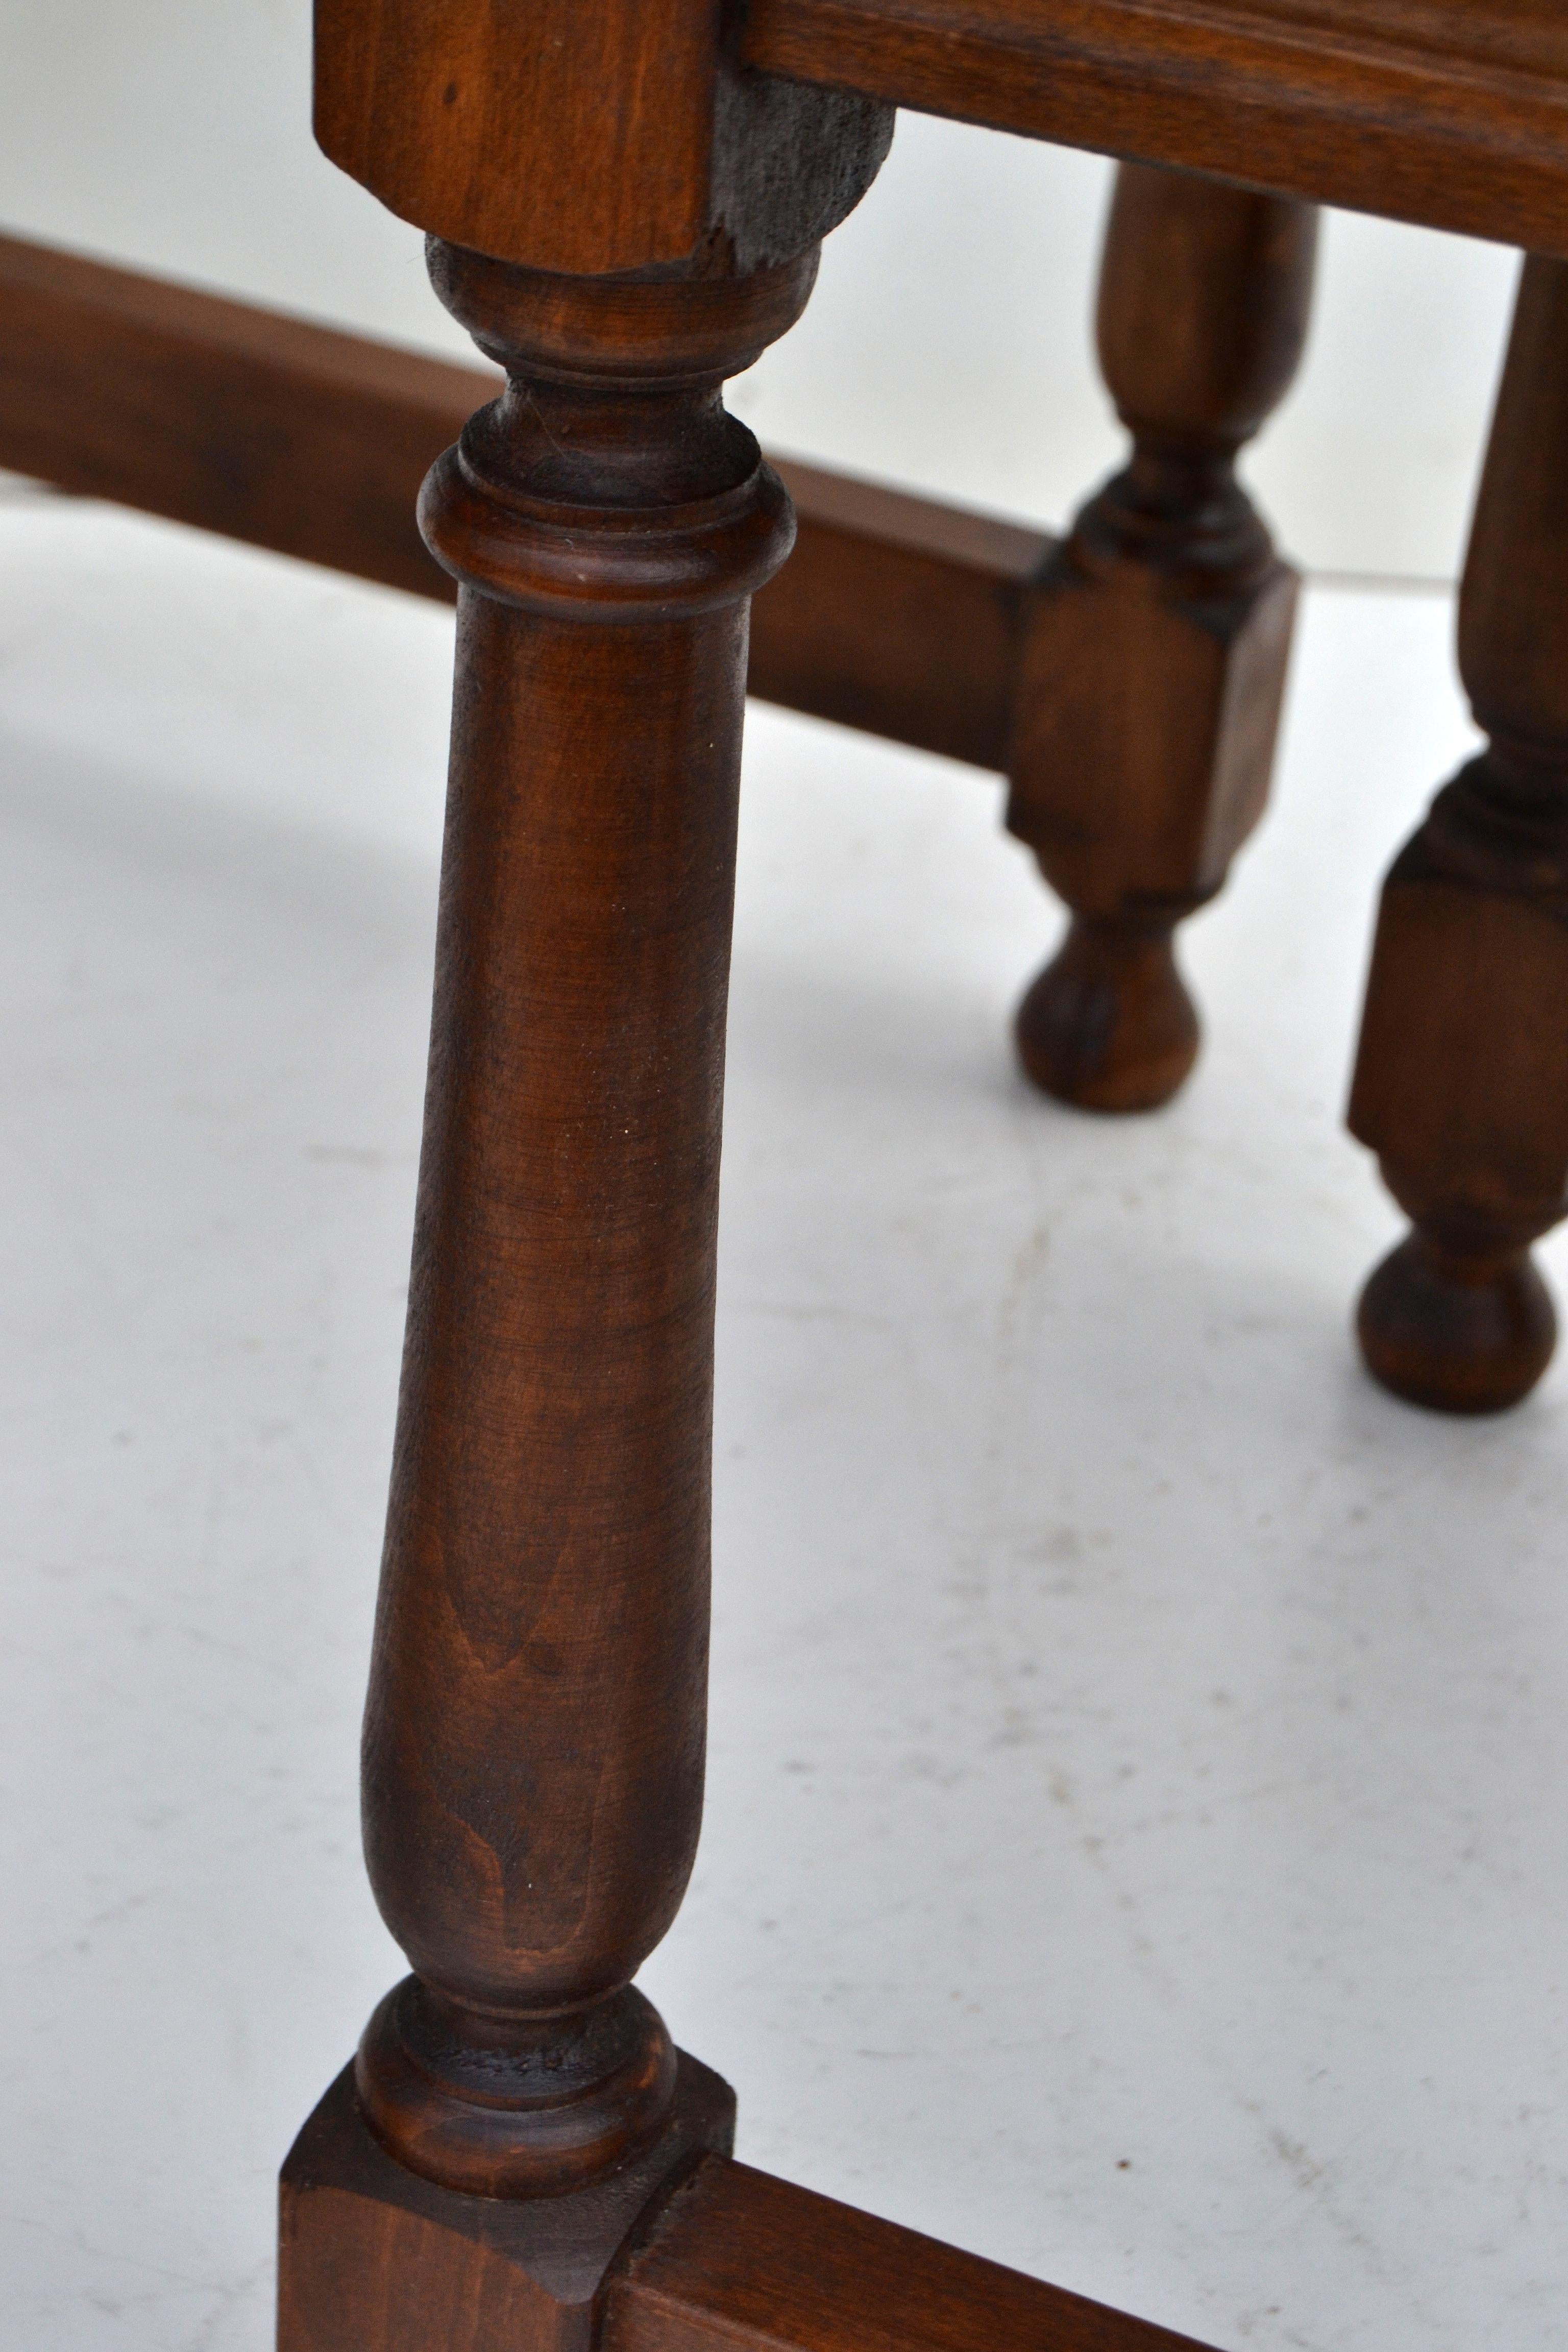 Antique Oakwood Set of 3 Nesting Tables Turned Legs, Stacking Tables, France For Sale 1